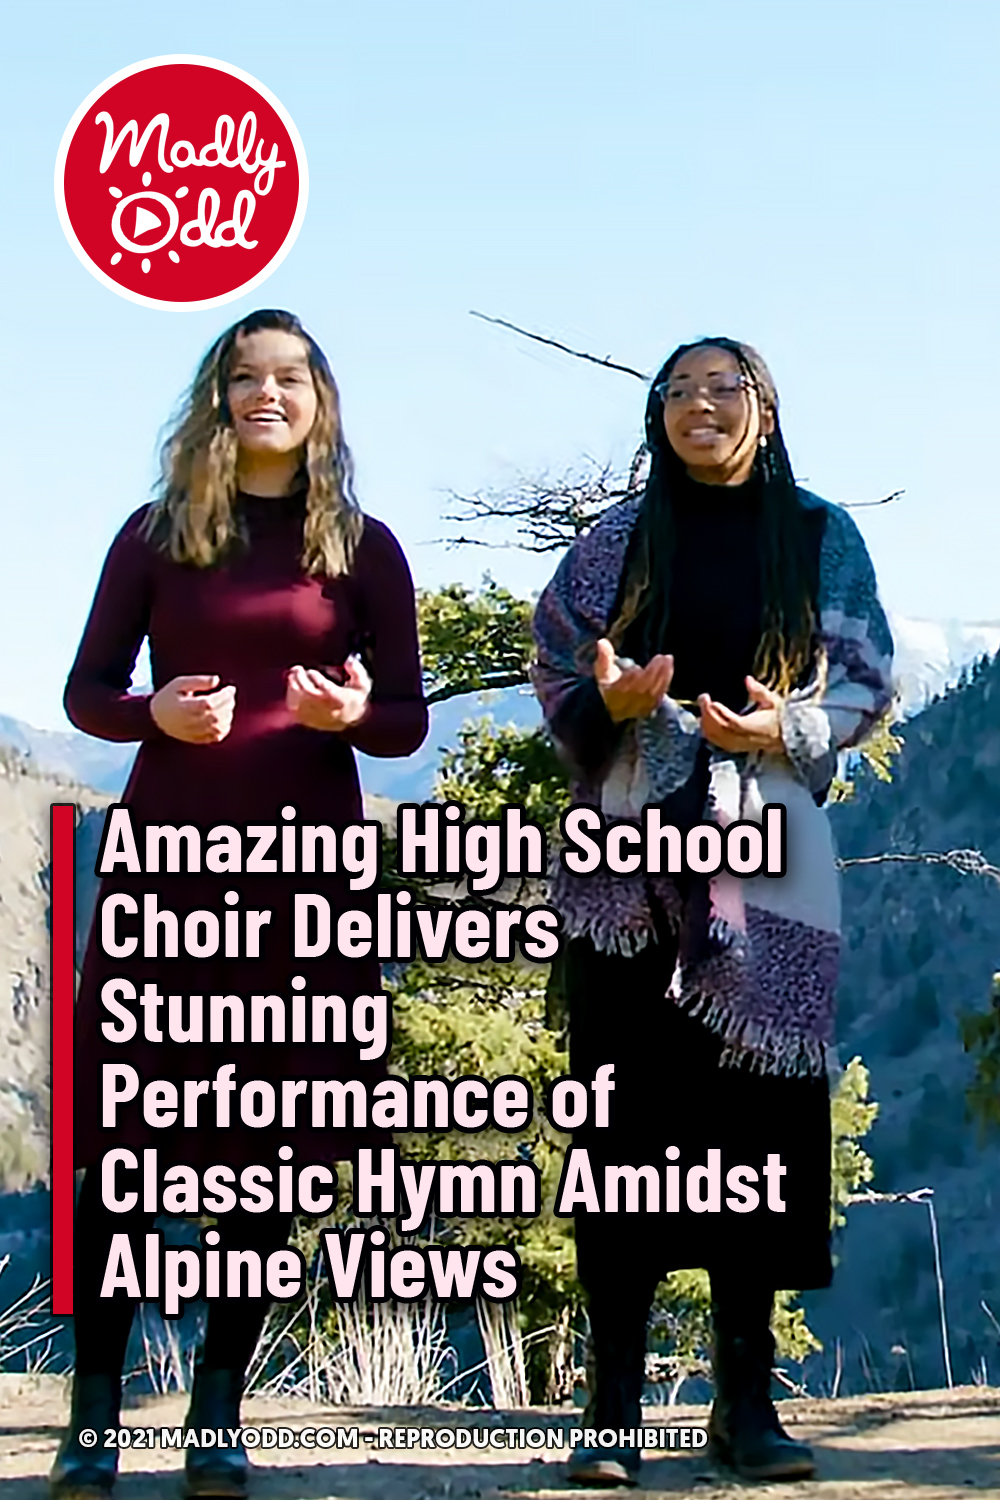 Amazing High School Choir Delivers Stunning Performance of Classic Hymn Amidst Alpine Views